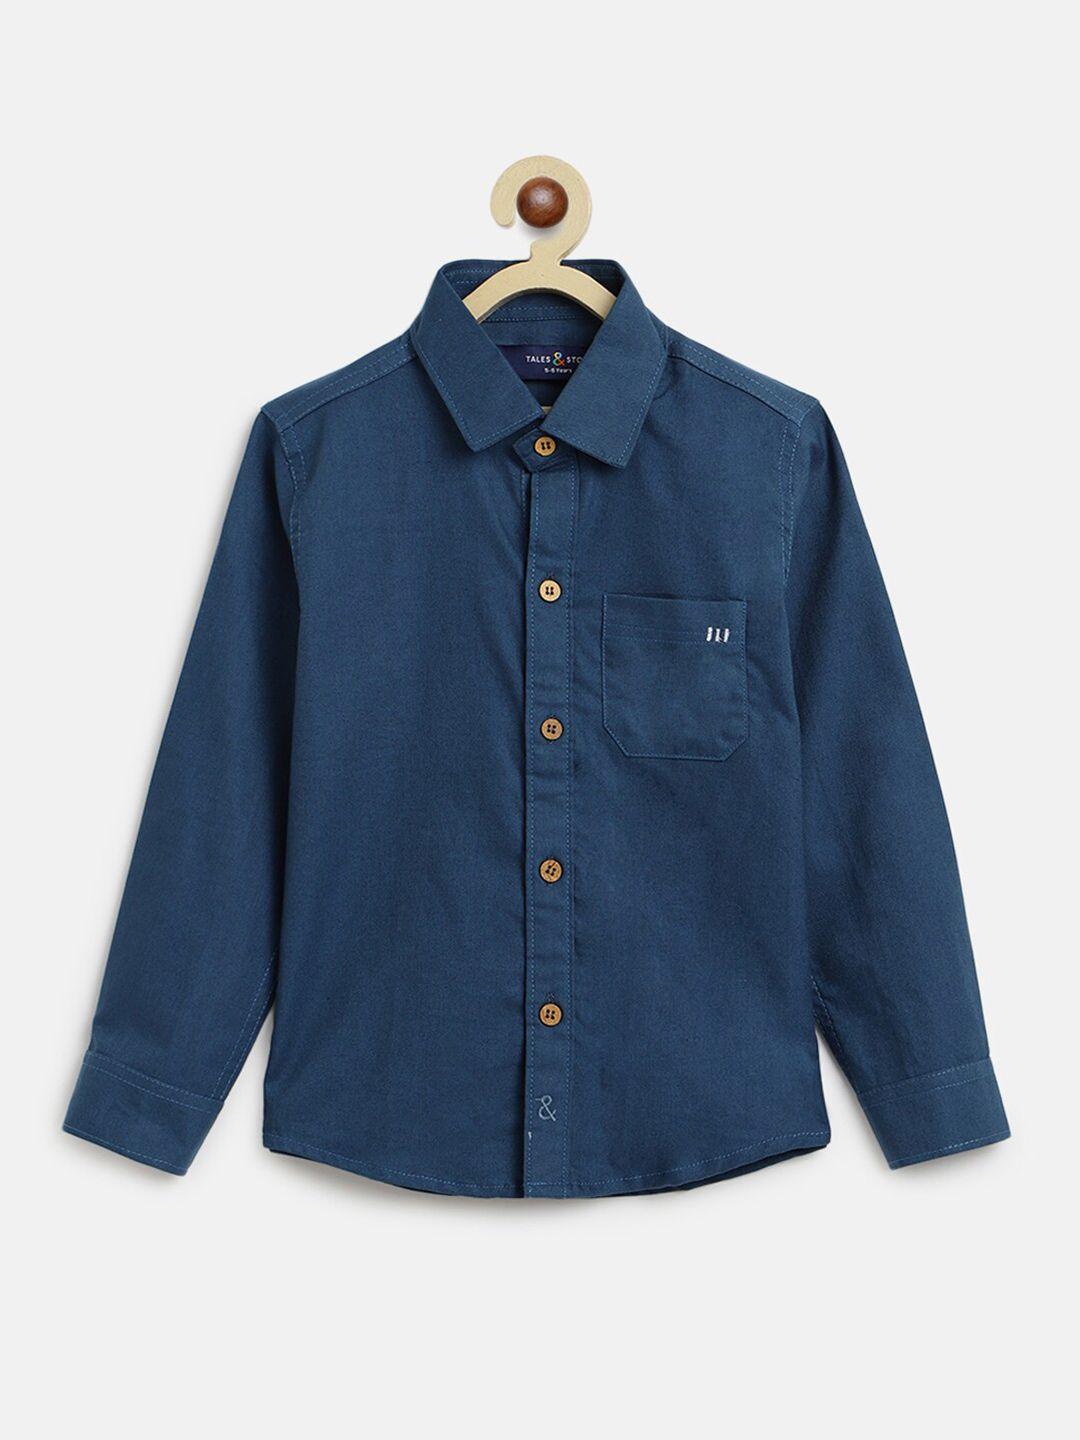 tales-&-stories-boys-blue-casual-shirt